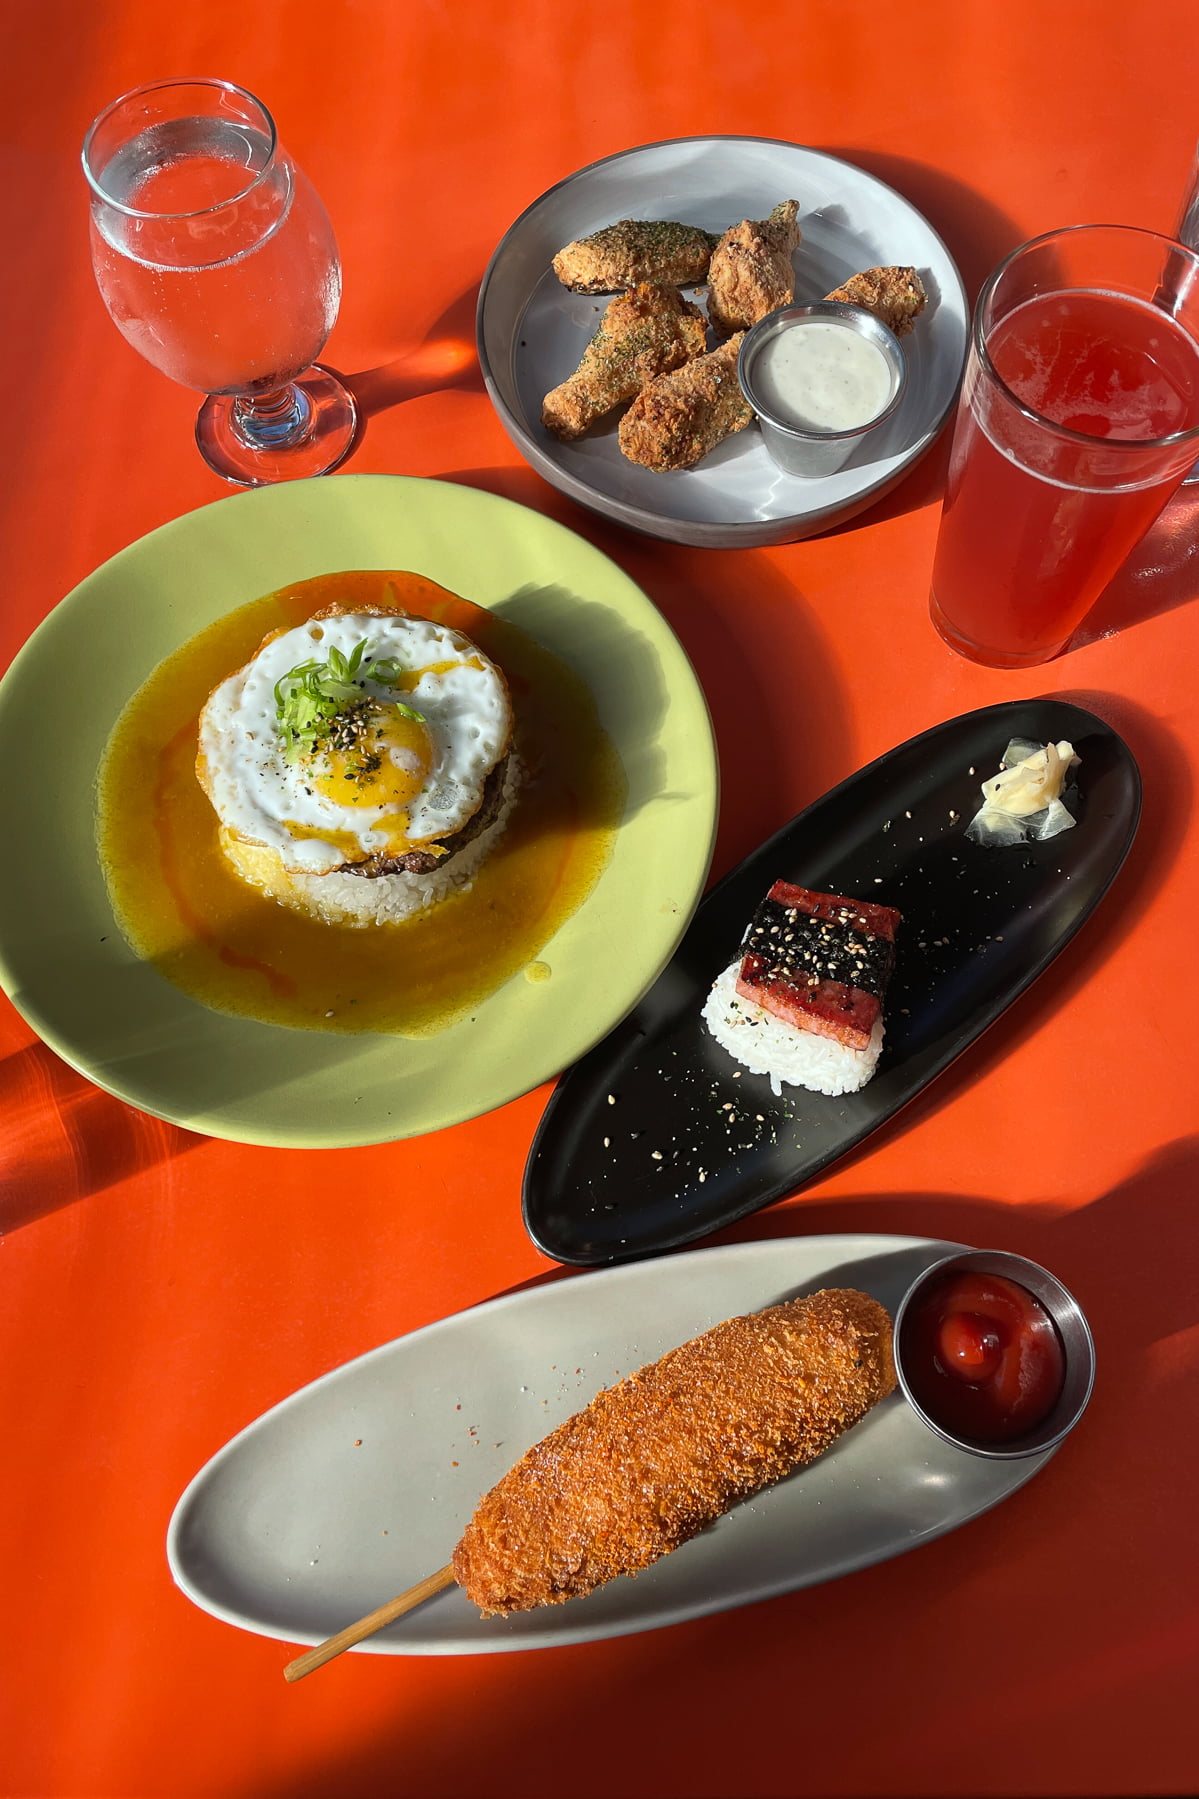 A range of dishes (including Spam musubi, loco moco, and corndog), served at Outer Orbit in San Francisco laid out on a table.